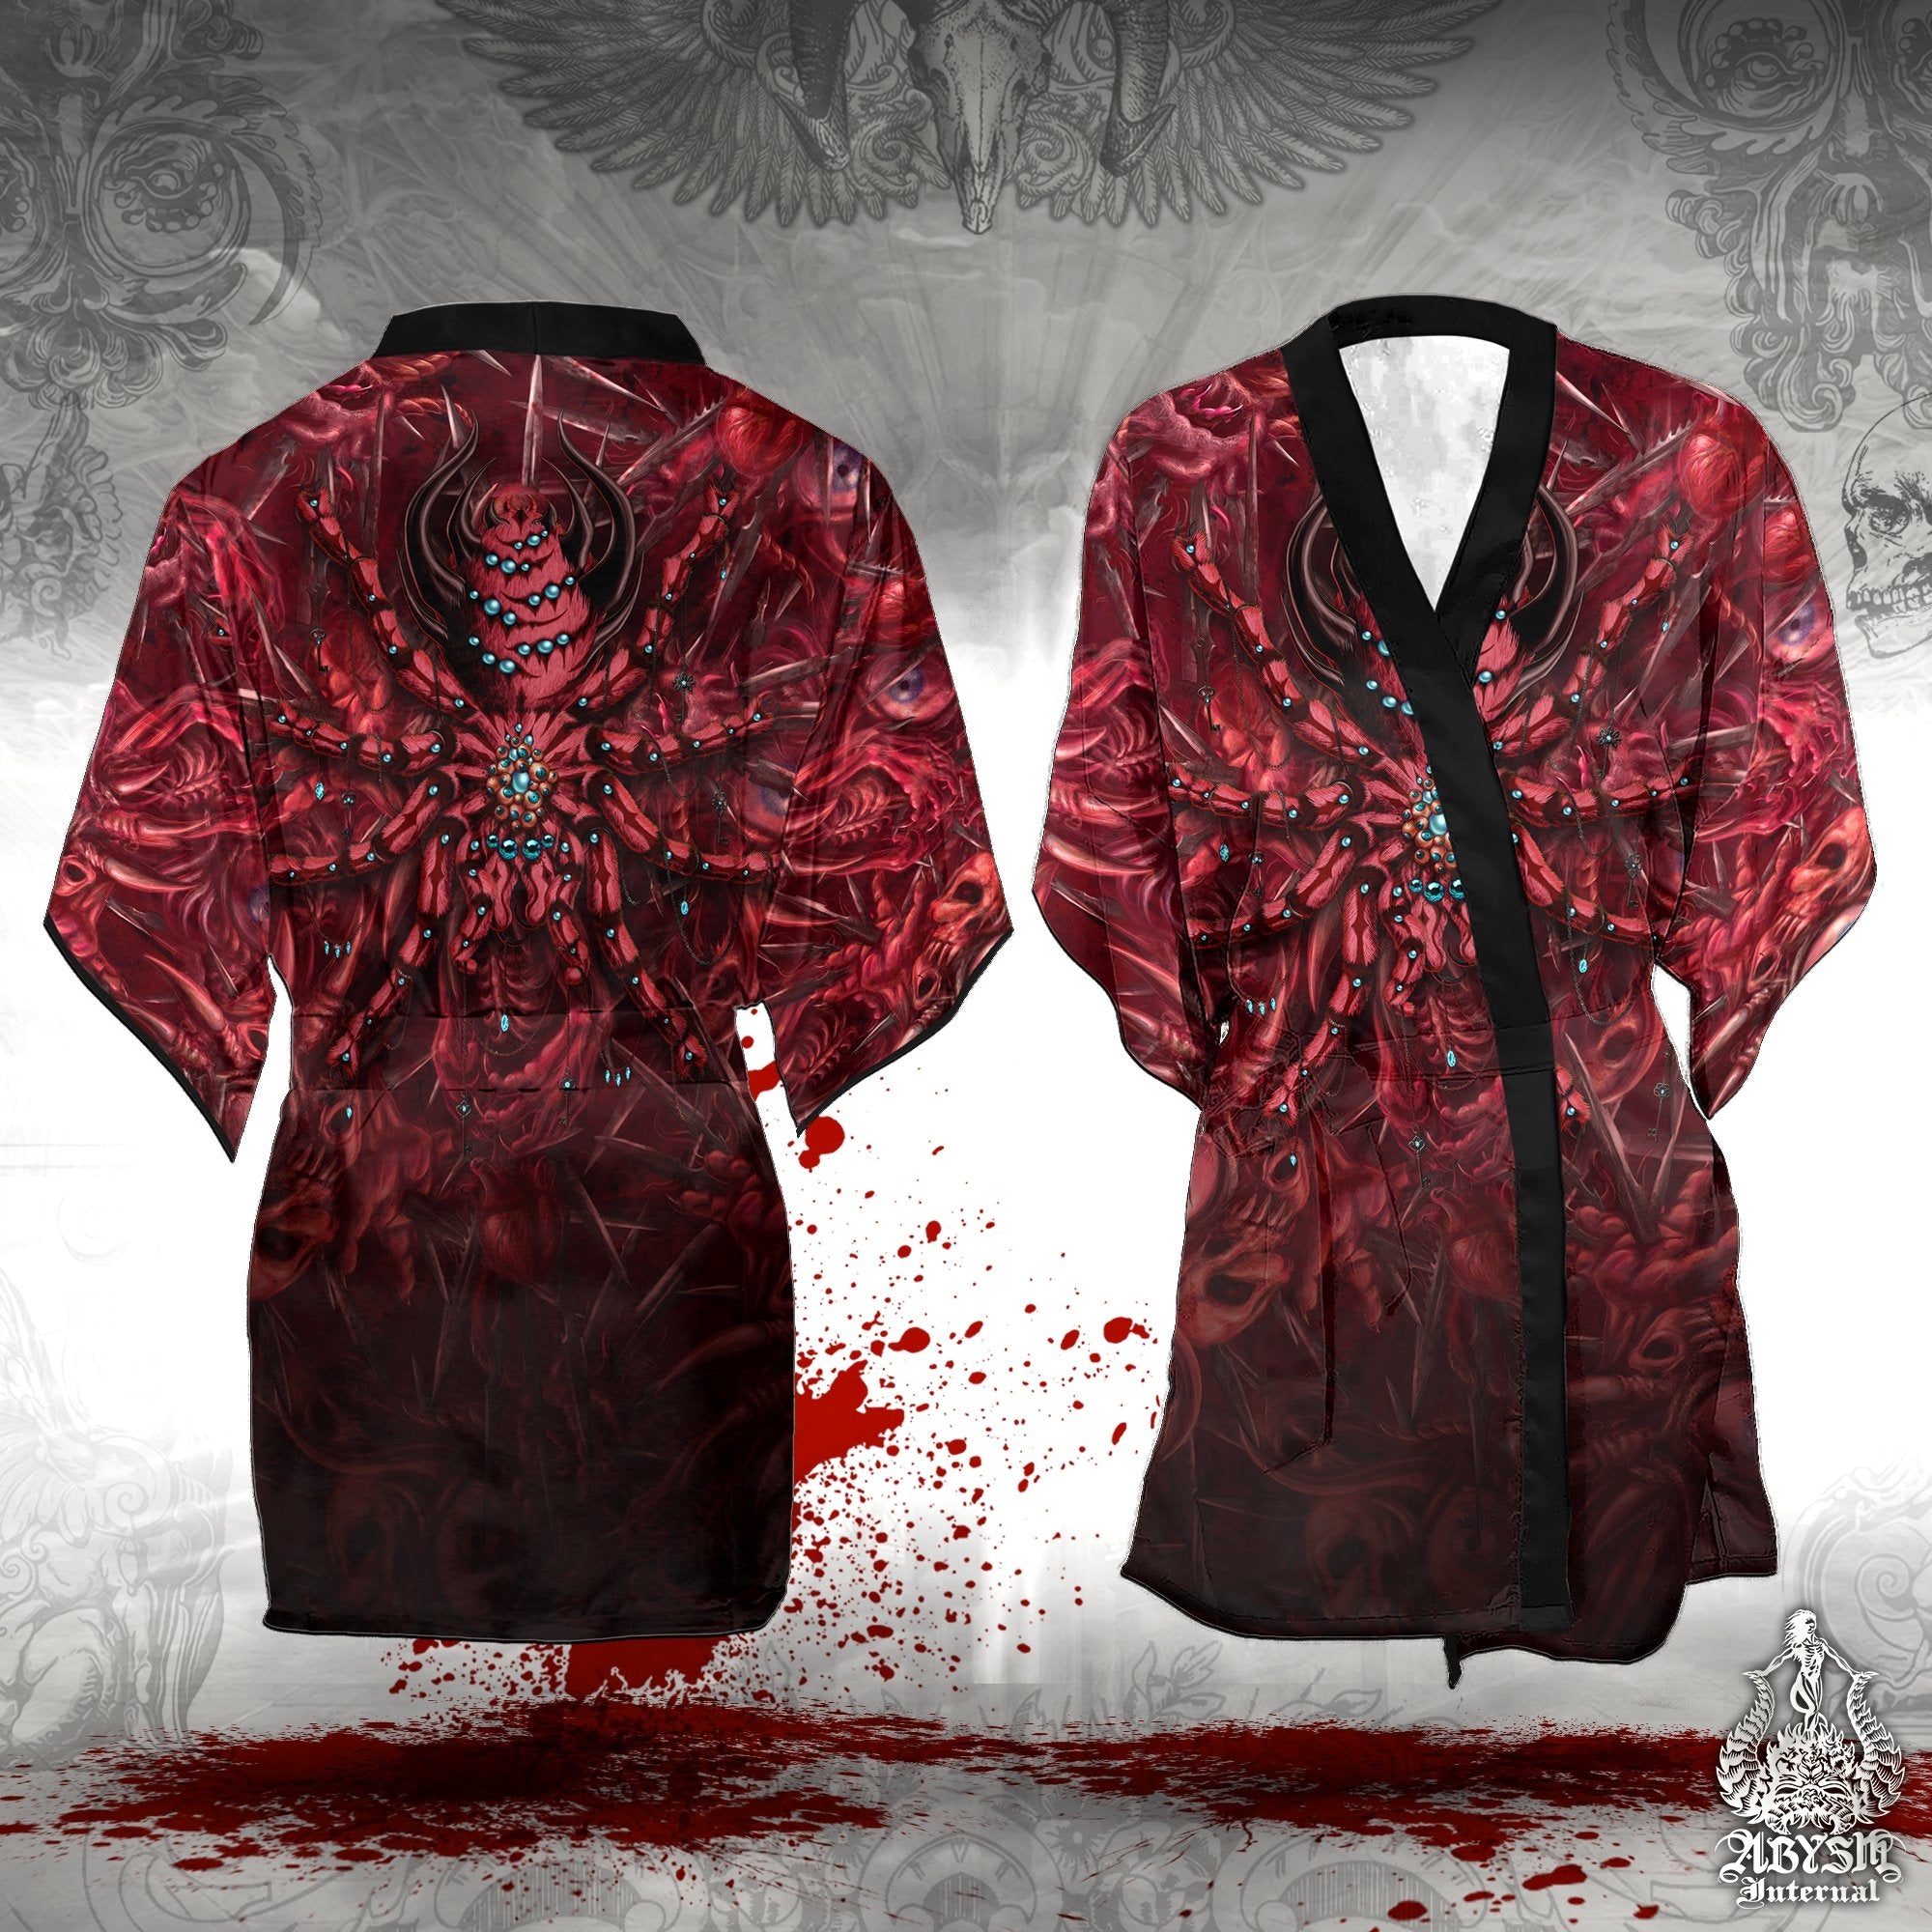 Horror Cover Up, Halloween Outfit, Spider Party Kimono, Summer Festival Robe, Alternative Clothing, Unisex - Tarantula, Gore and Blood - Abysm Internal